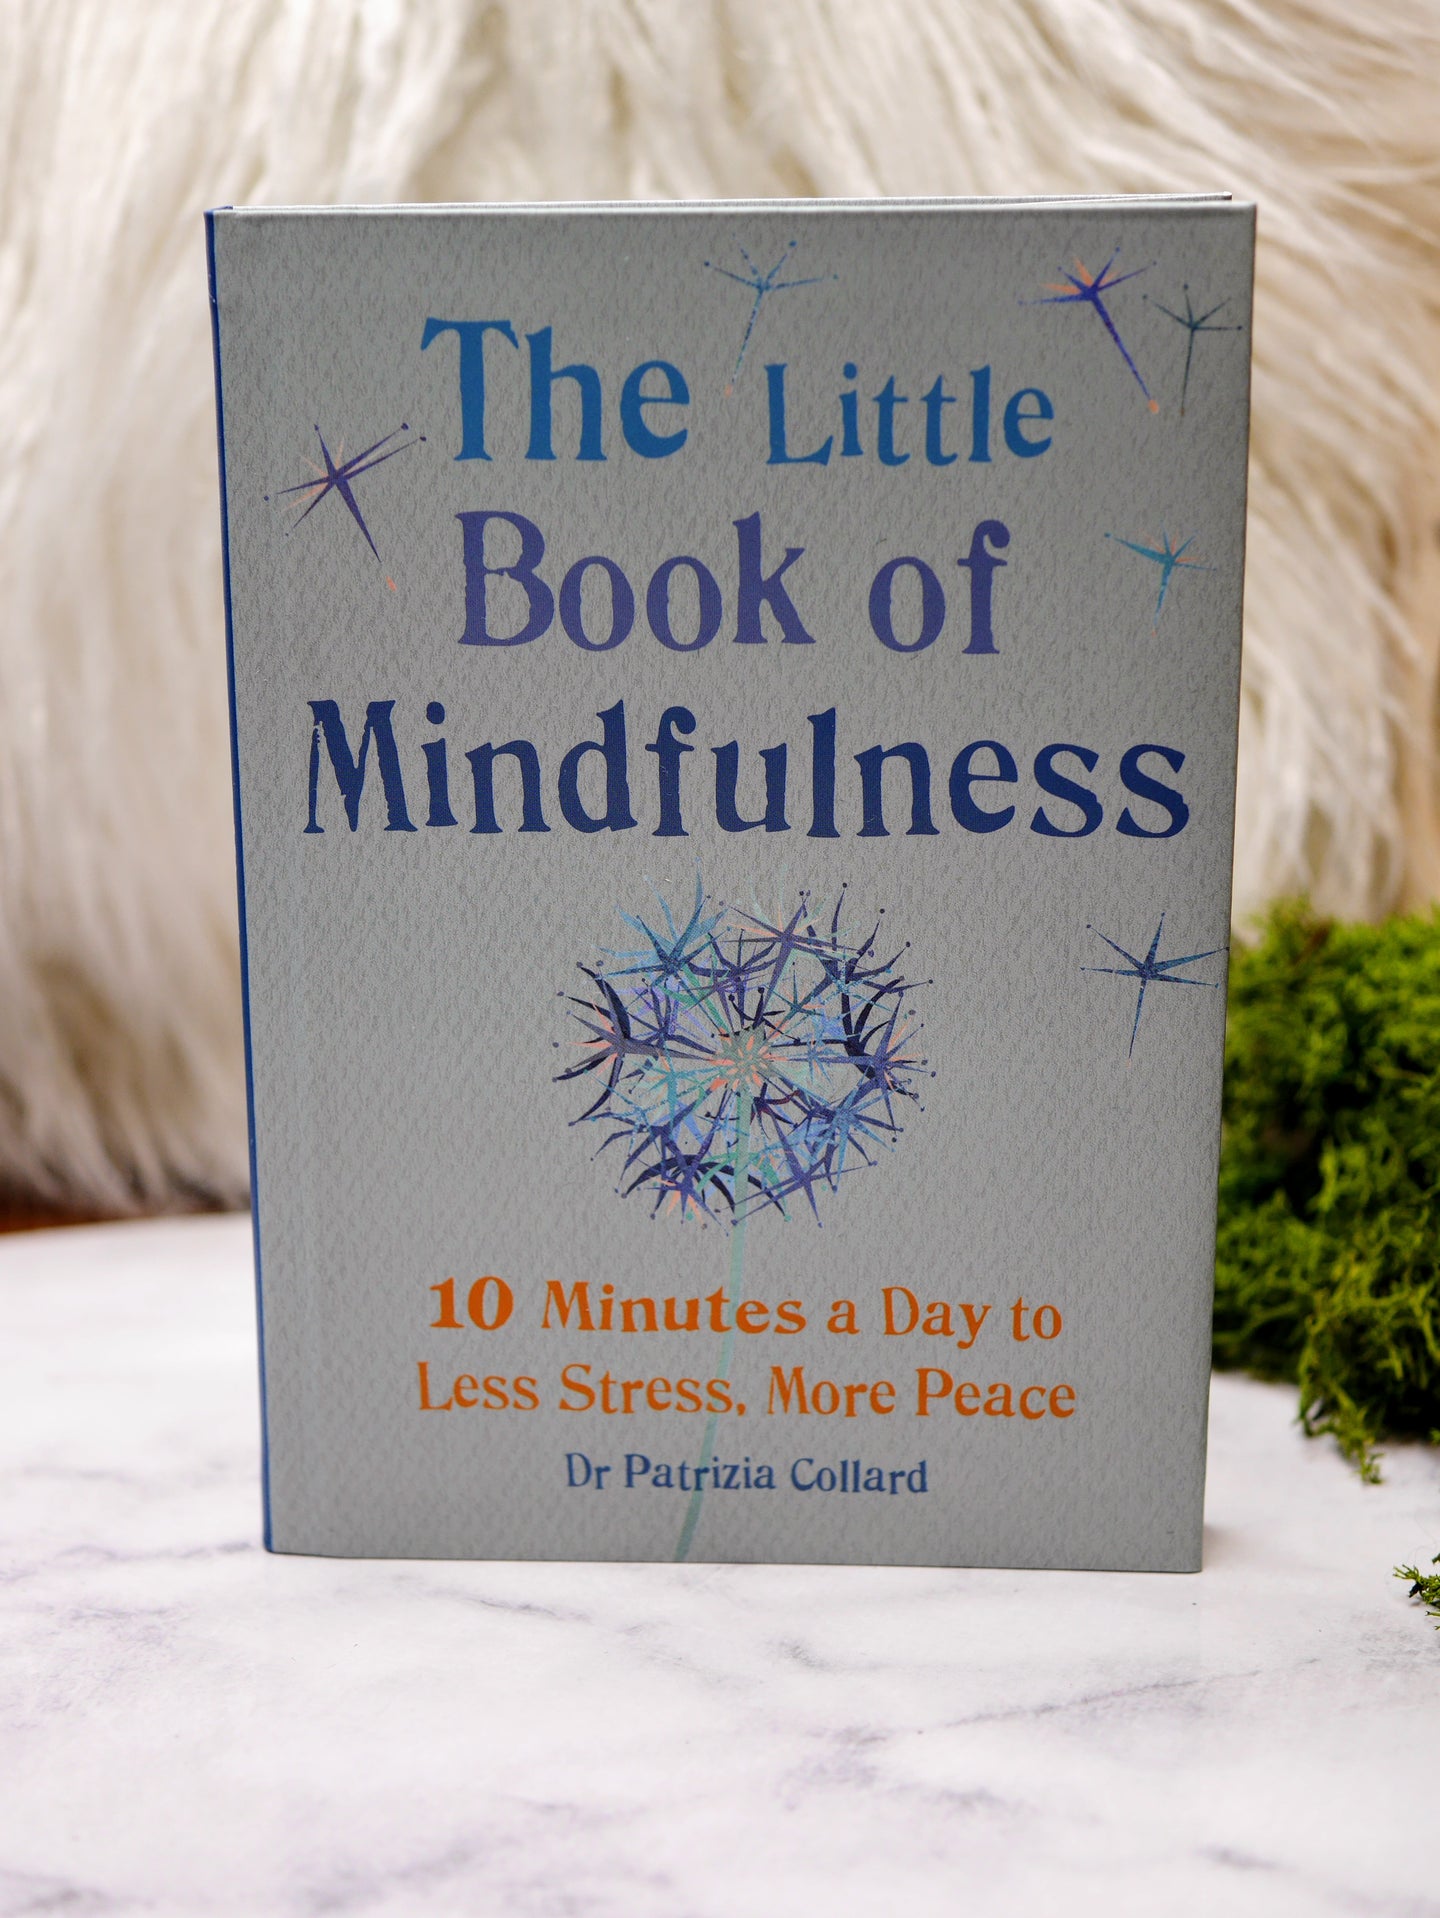 The little book of mindfulness